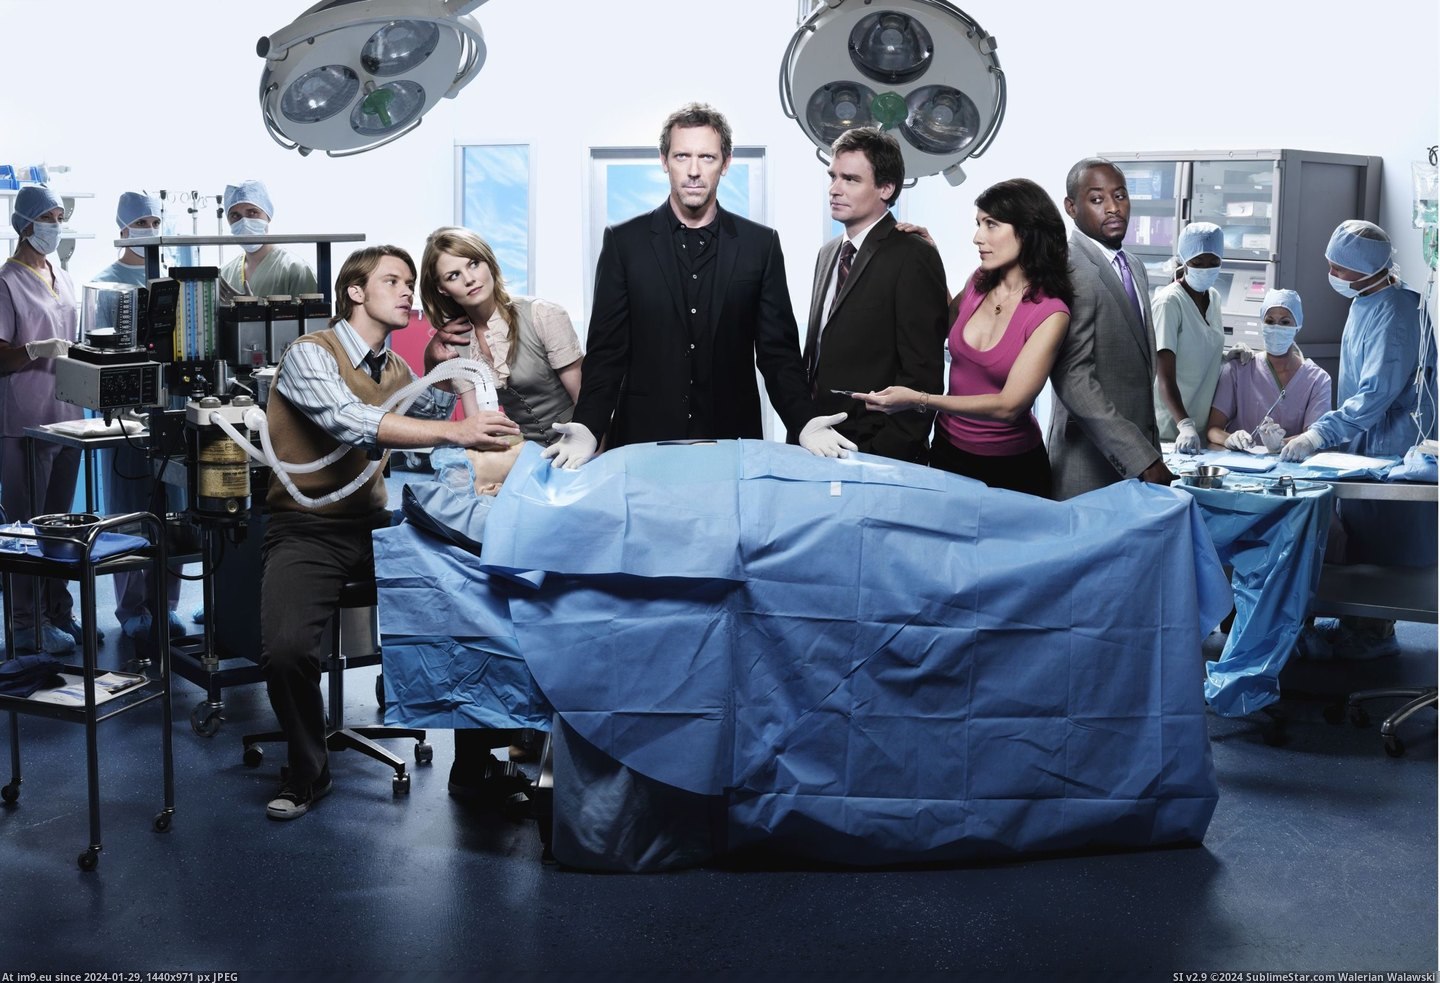 #Show  #House Tv Show House 21740 Pic. (Изображение из альбом TV Shows HD Wallpapers))